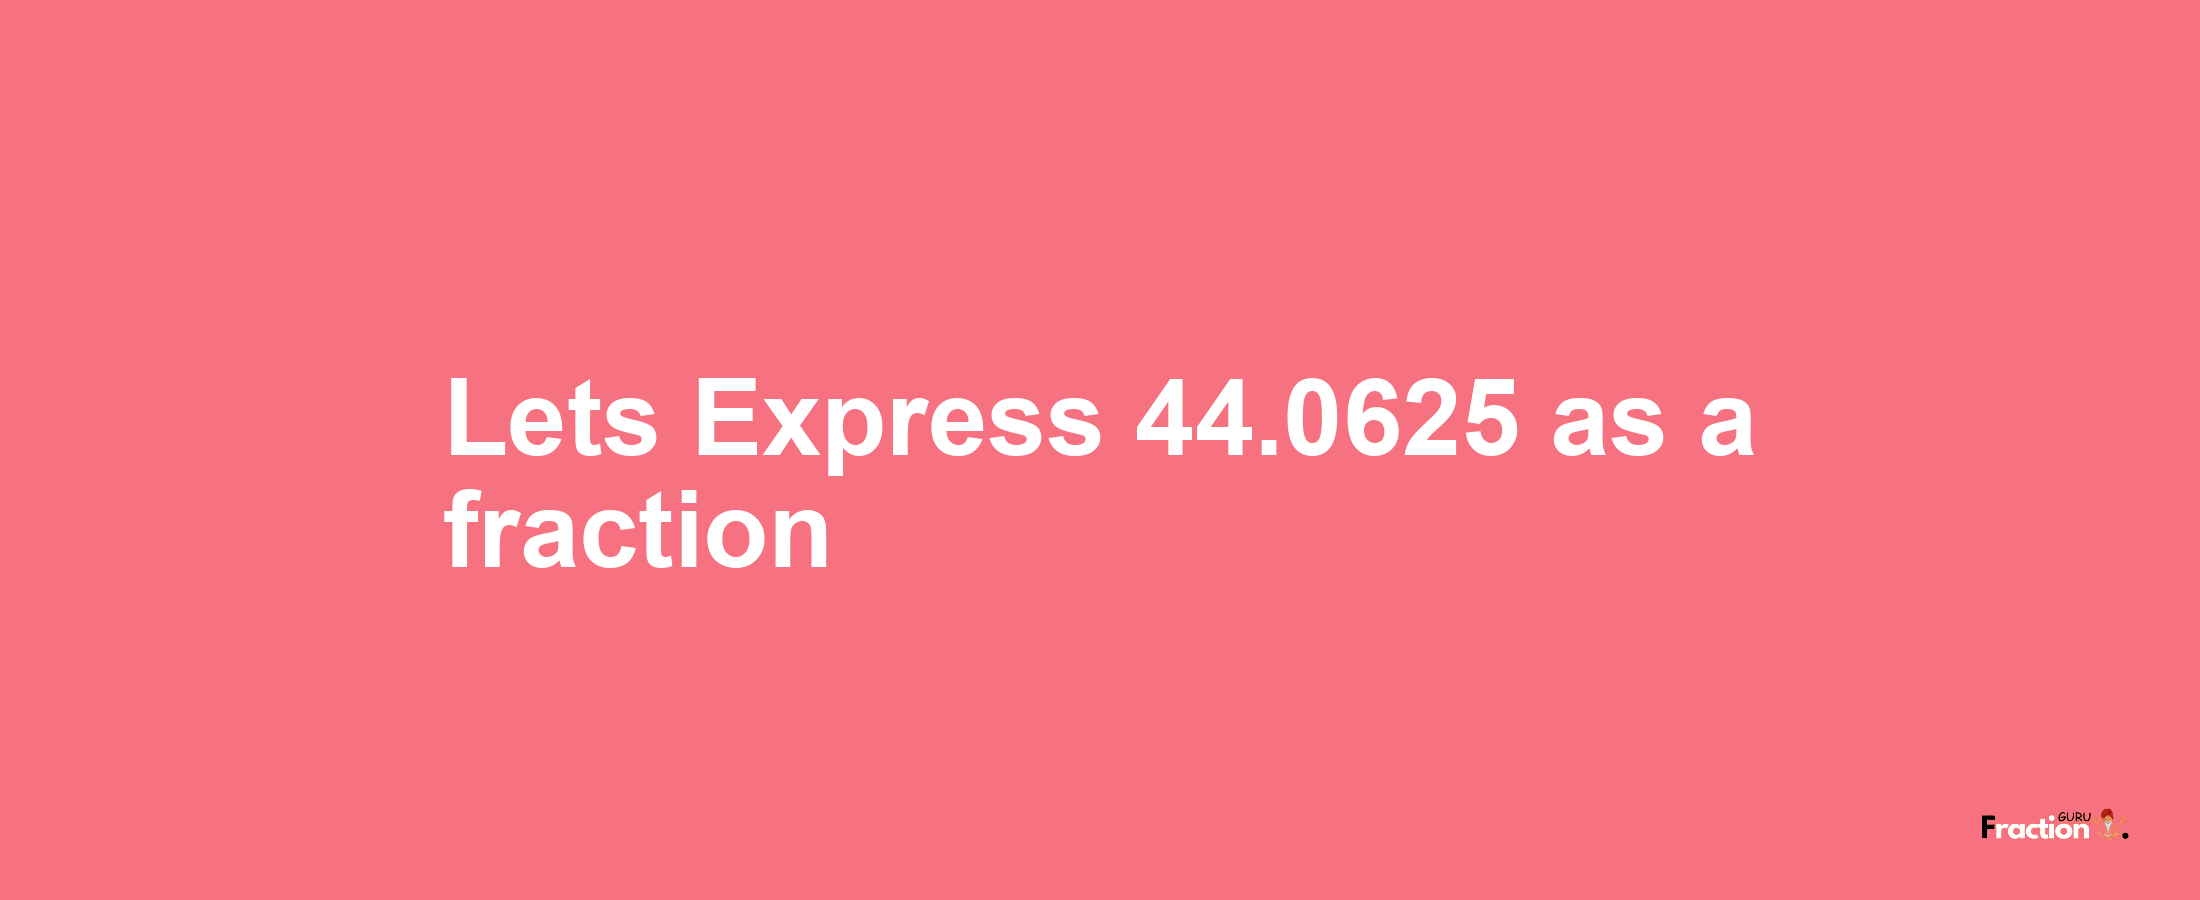 Lets Express 44.0625 as afraction